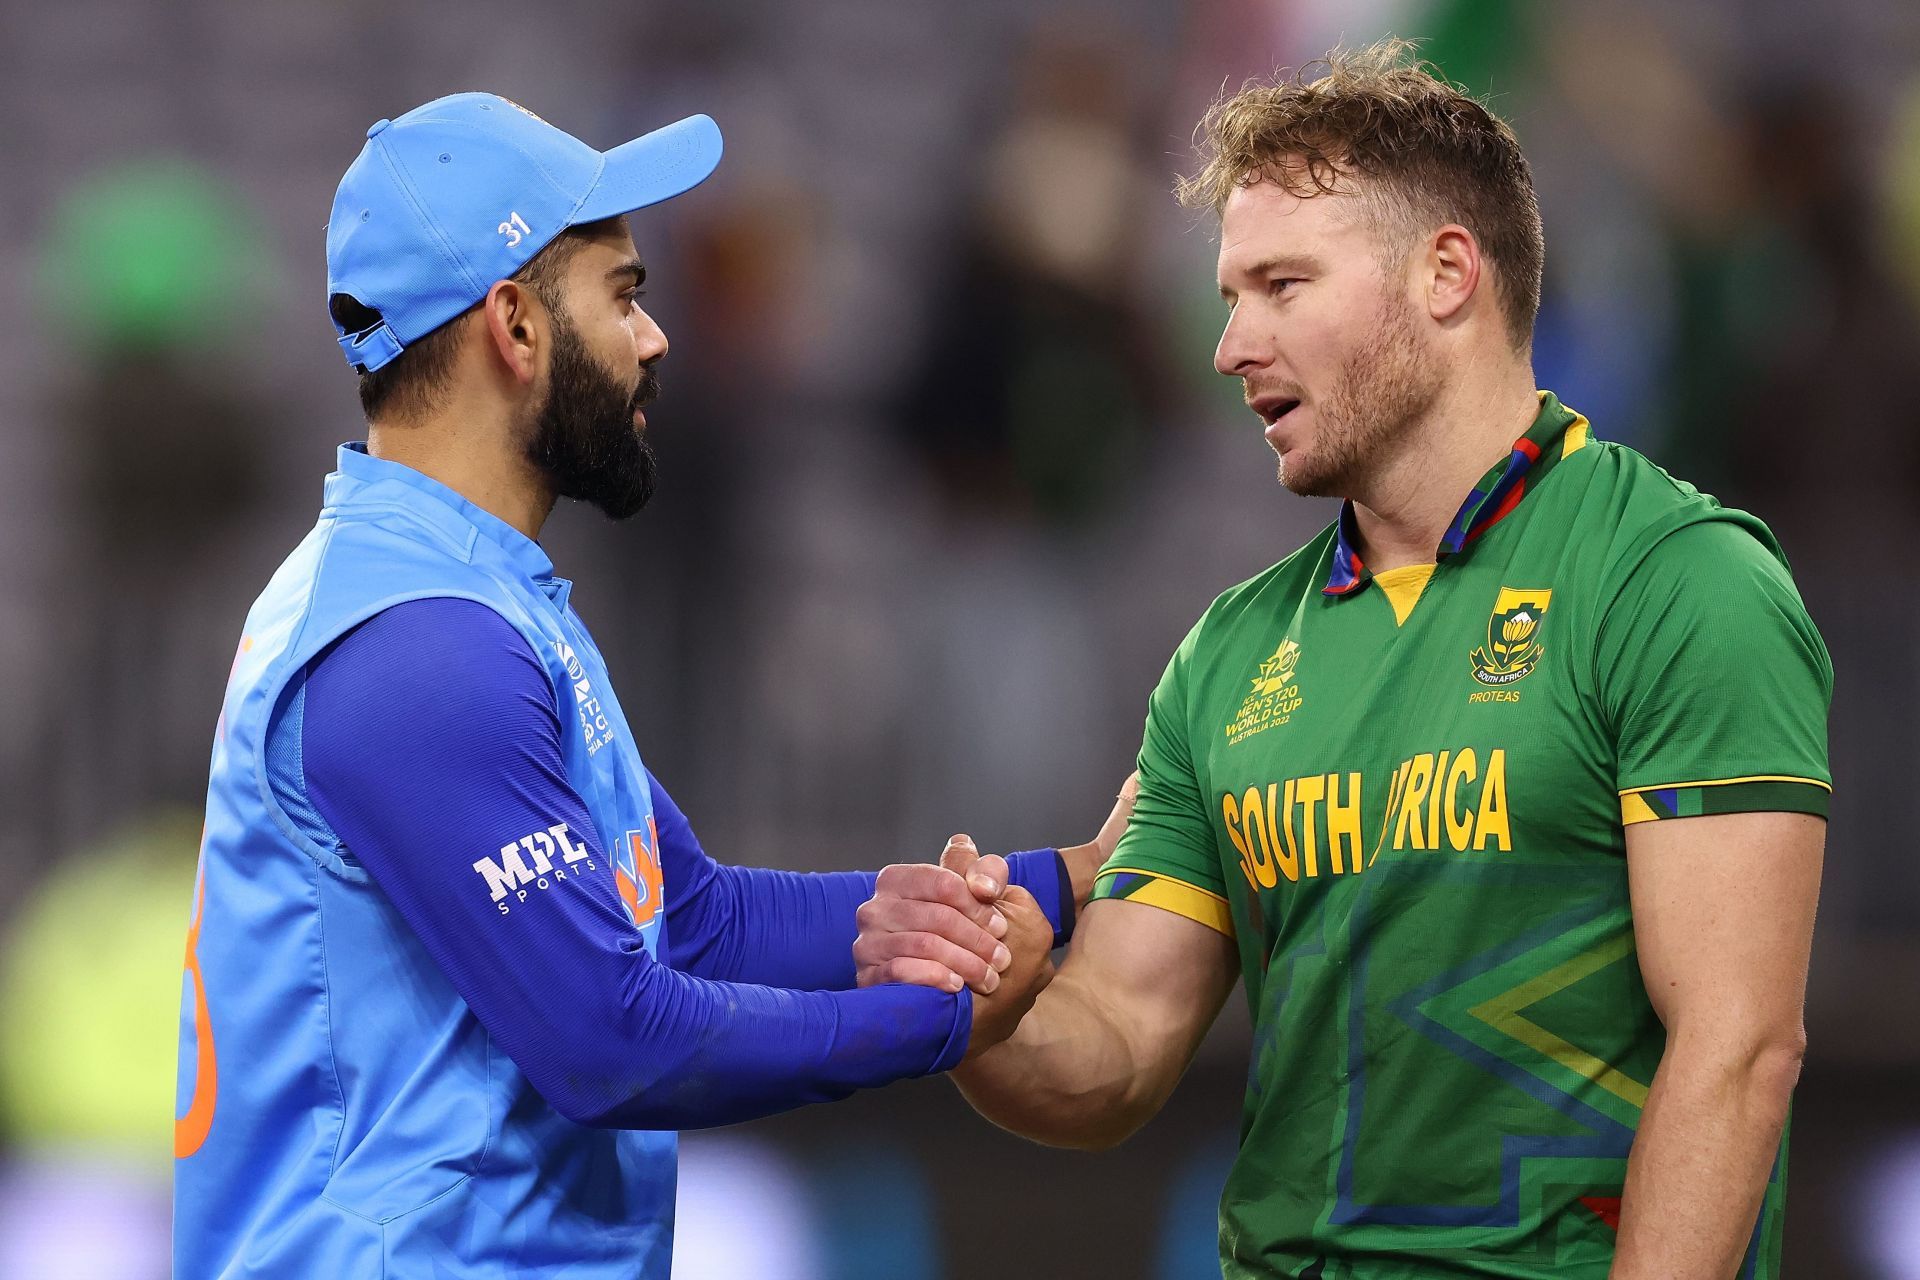 India lost to South Africa by 5 wickets in Perth